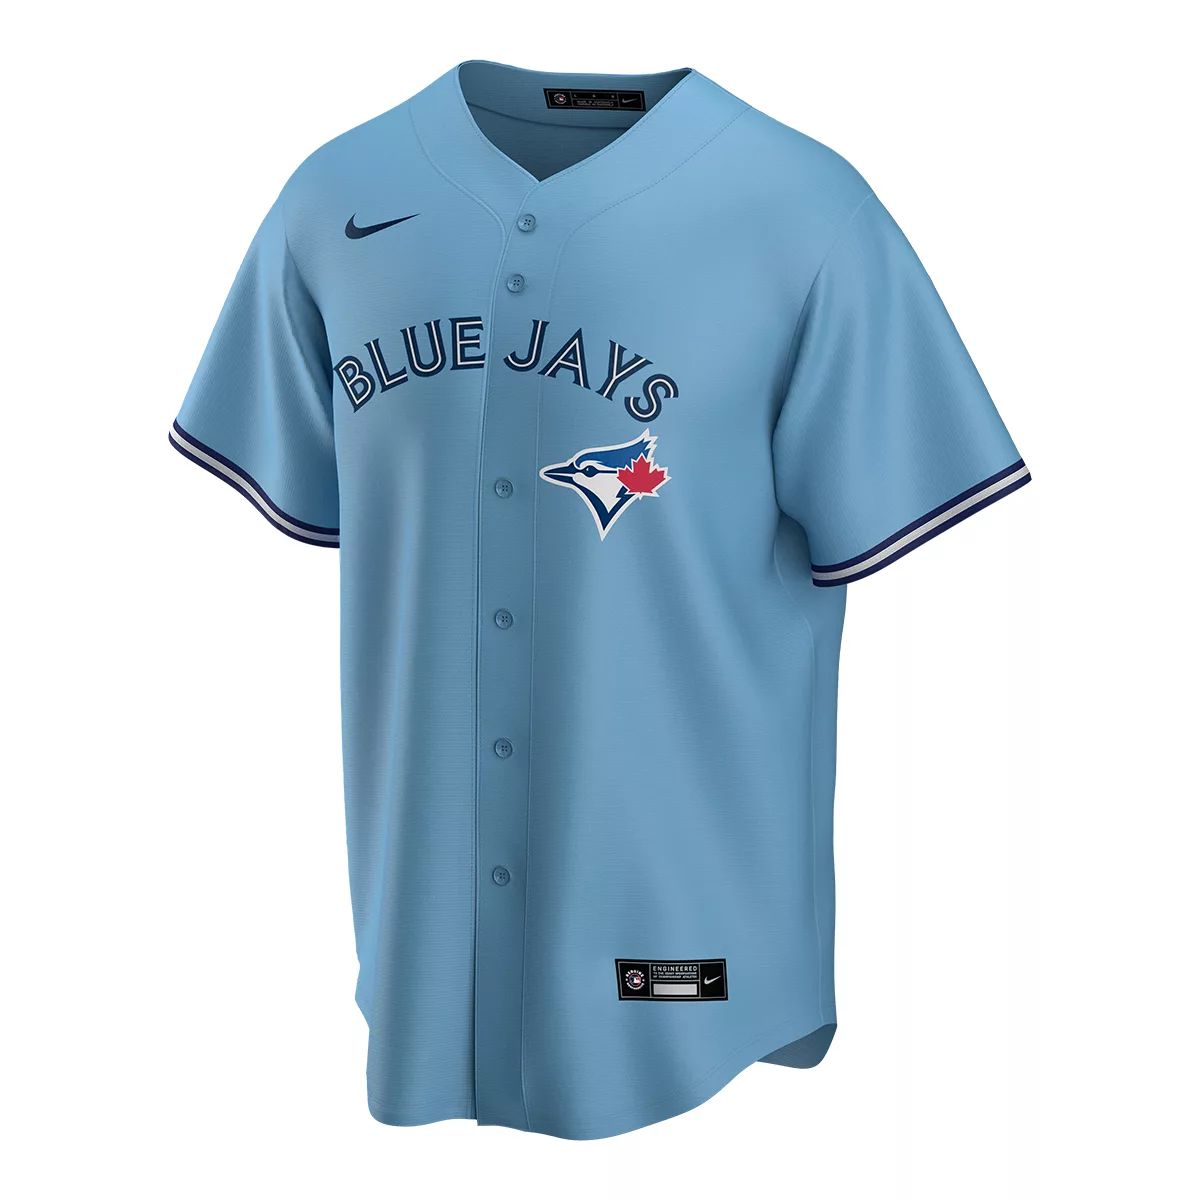 womens blue jays jersey outfit